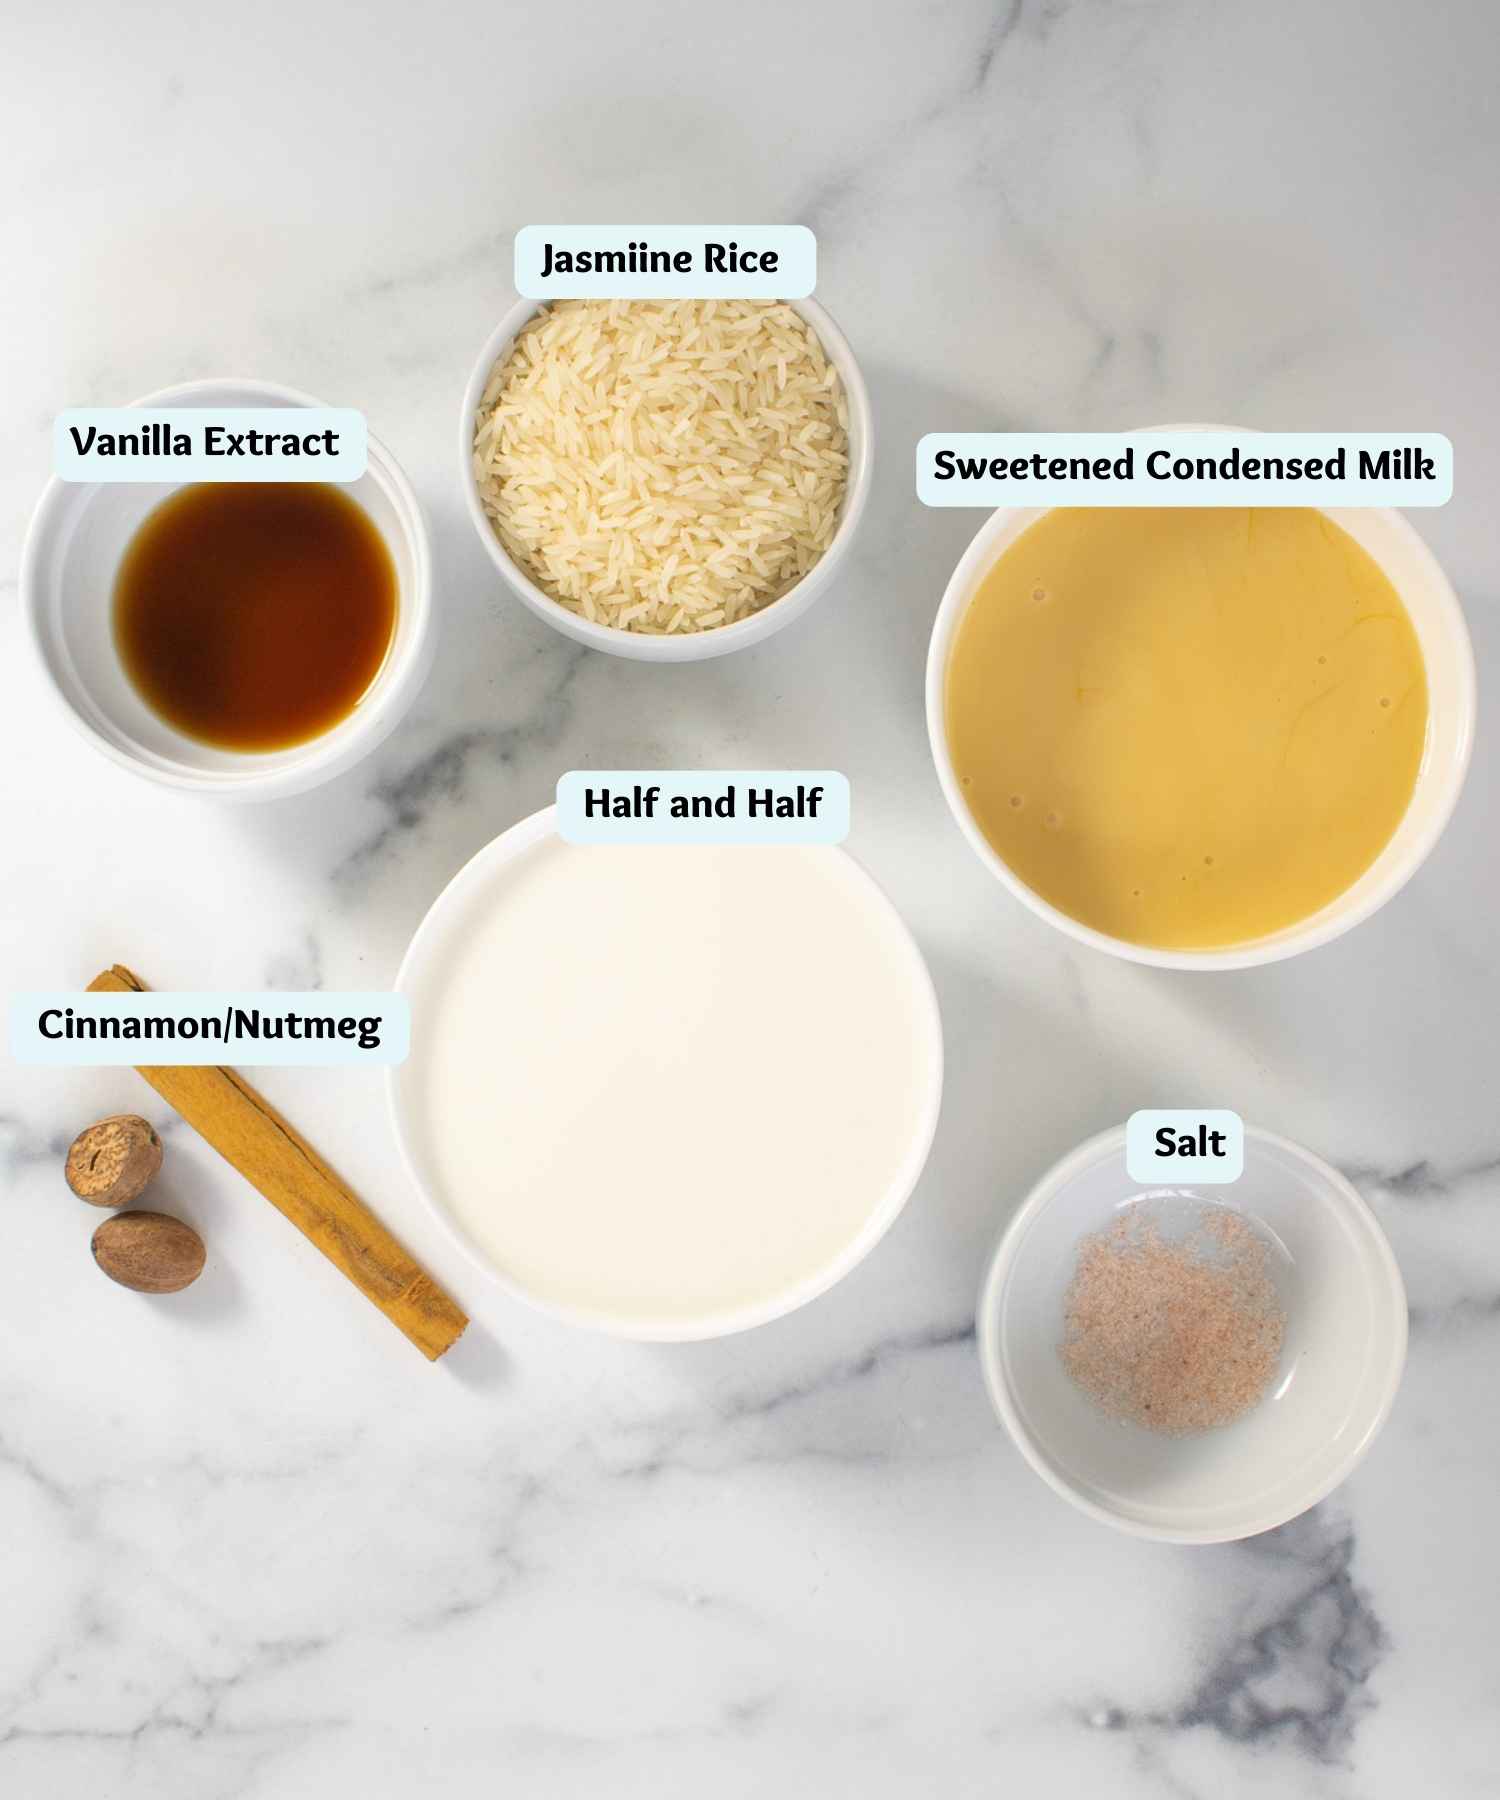 Ingredients for rice pudding made with sweetened condensed milk.